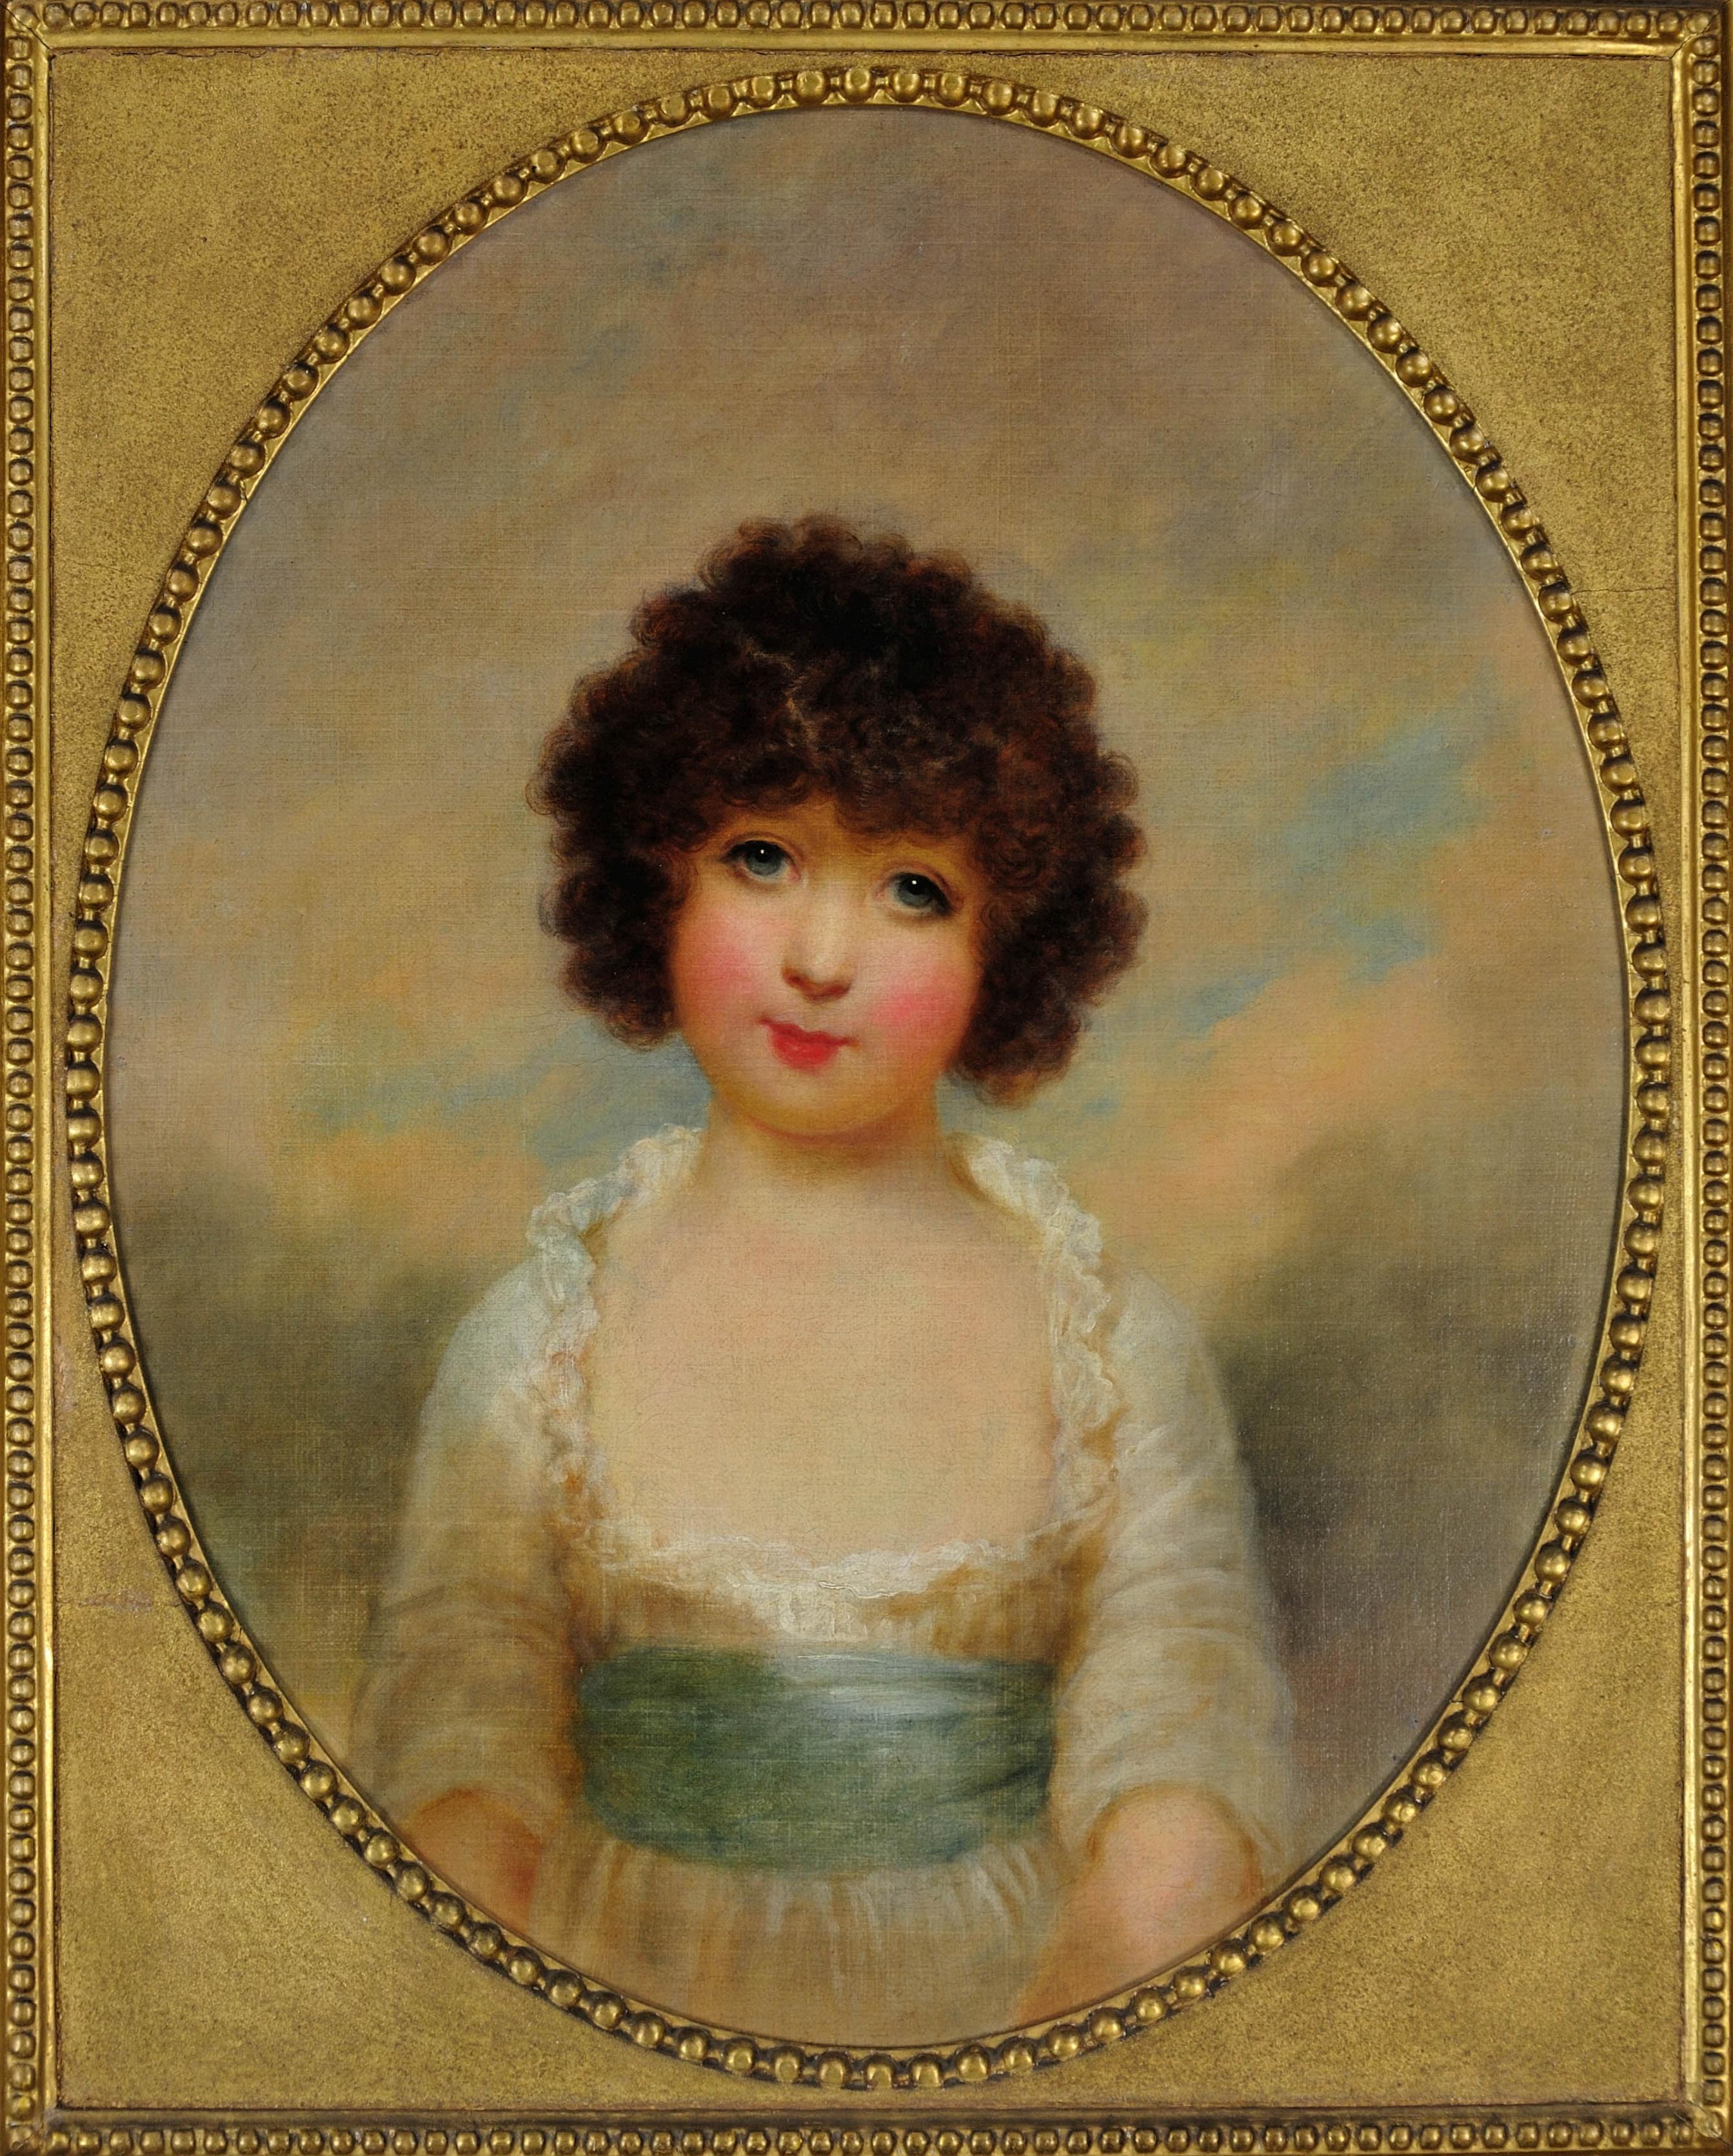 Charlotte Shore Daughter of 1st Lord Teignmouth. Portrait in India 1792 to 1795. - Painting by Arthur William Devis